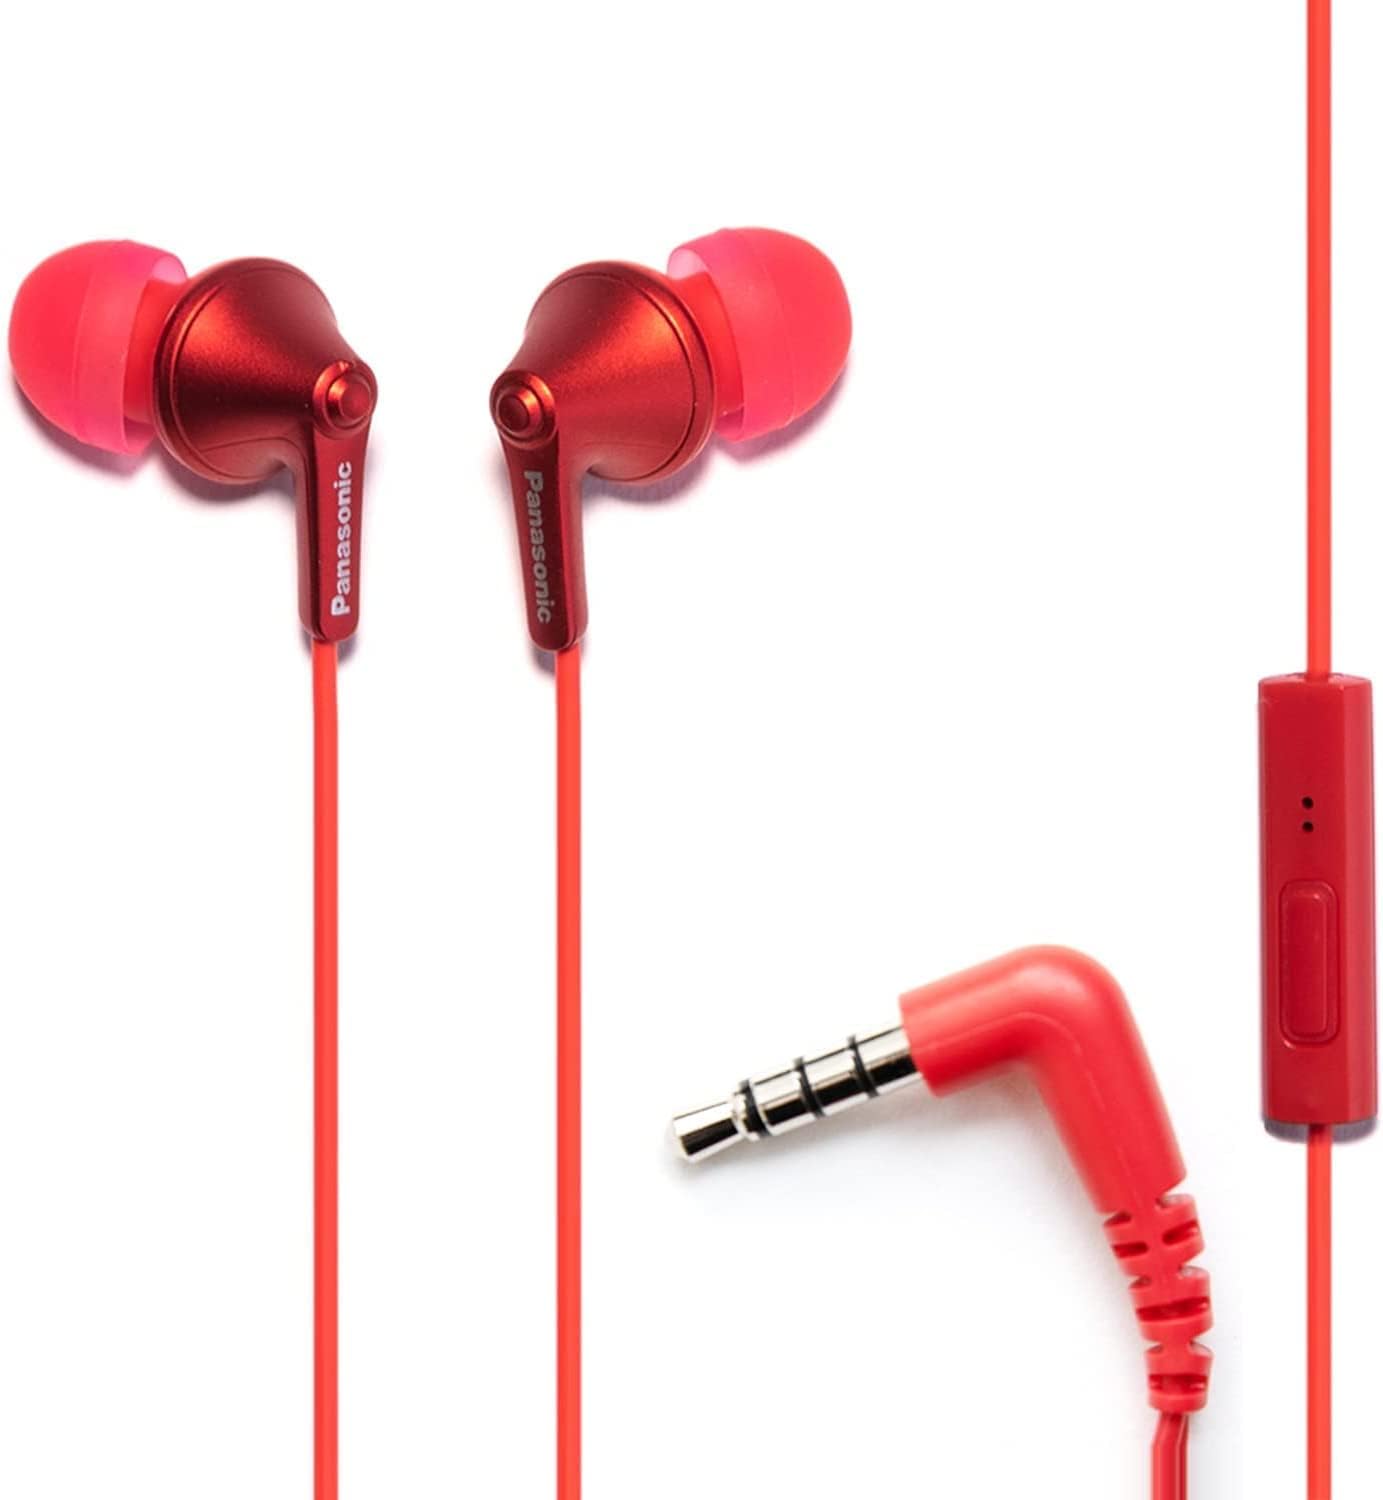 Panasonic ErgoFit Wired Earbuds, In-Ear Headphones with Microphone and Call Controller, Ergonomic Custom-Fit Earpieces (S/M/L), 3.5mm Jack for Phones and Laptops - RP-TCM125-W (RED)